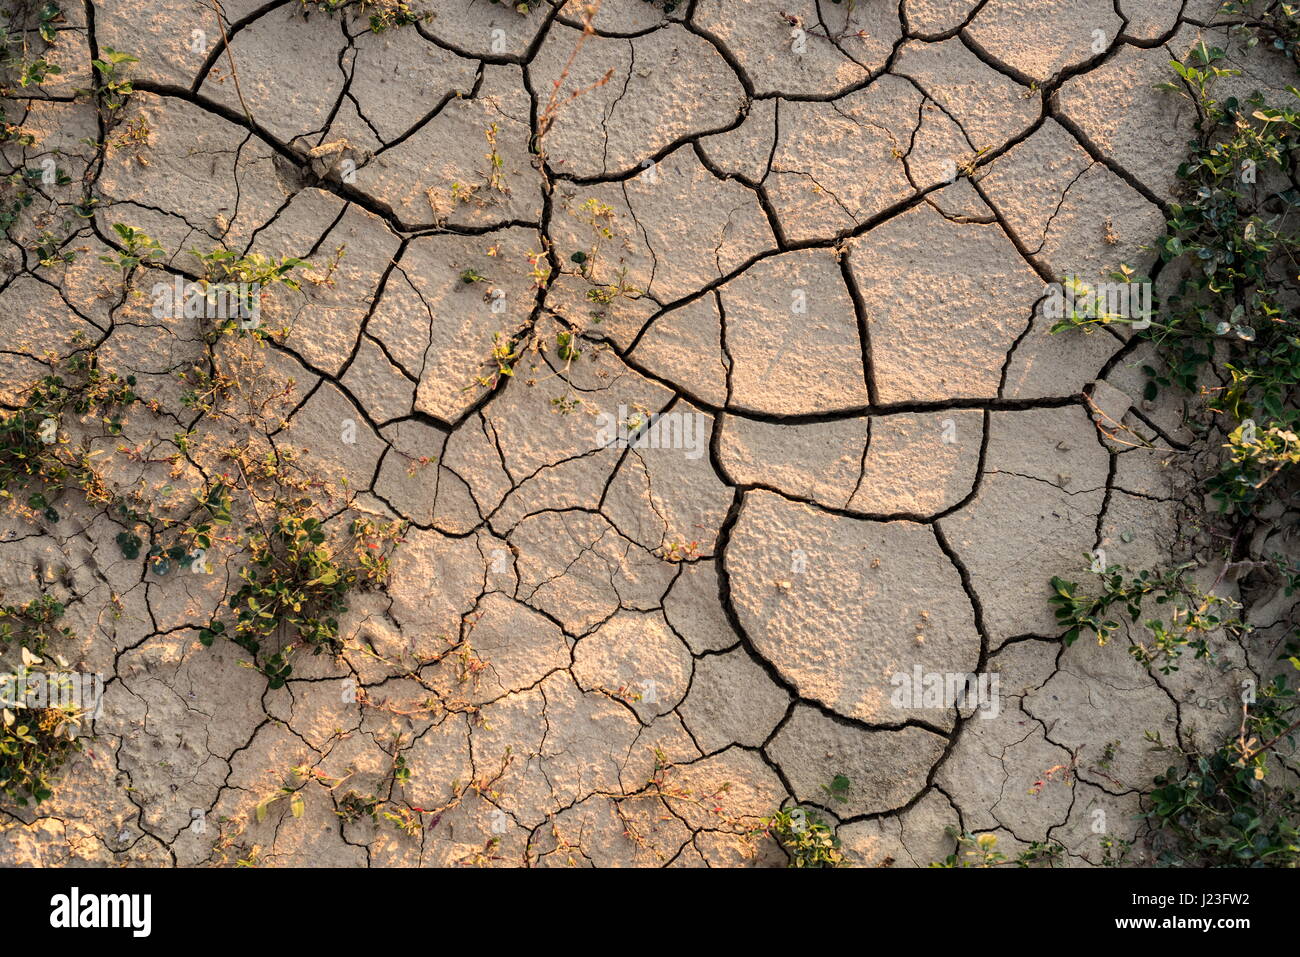 Drought agricultural land. The ground cracks, no water, lack of moisture. Stock Photo